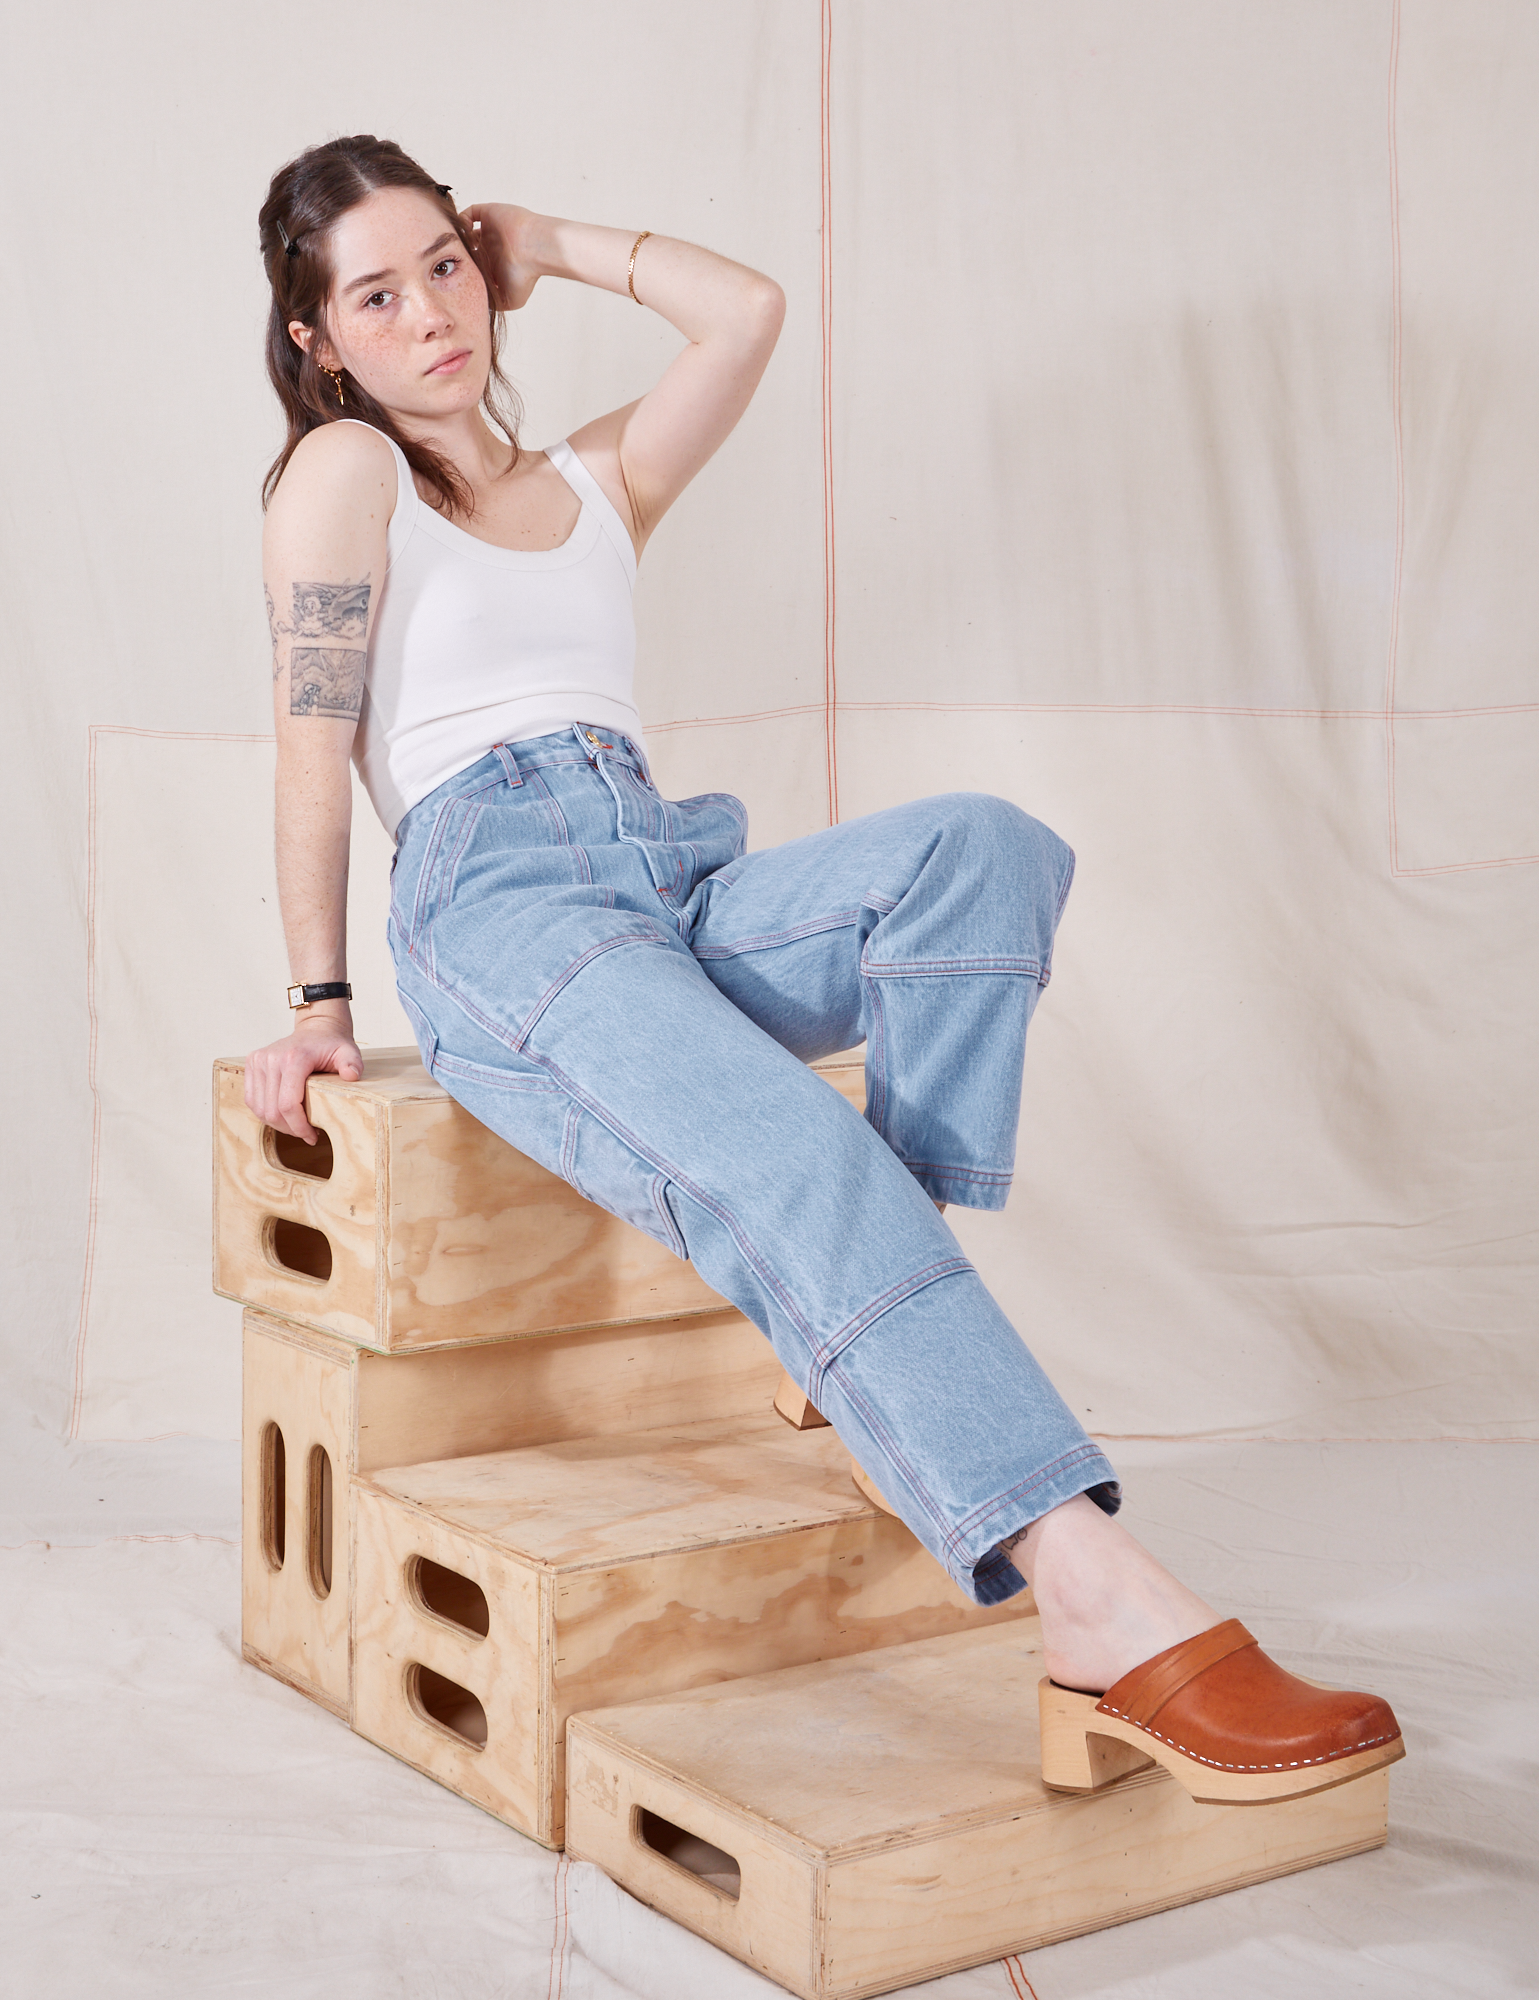 Hana is wearing Petite Carpenter Jeans in Light Wash and Cropped Cami in vintage tee off-white